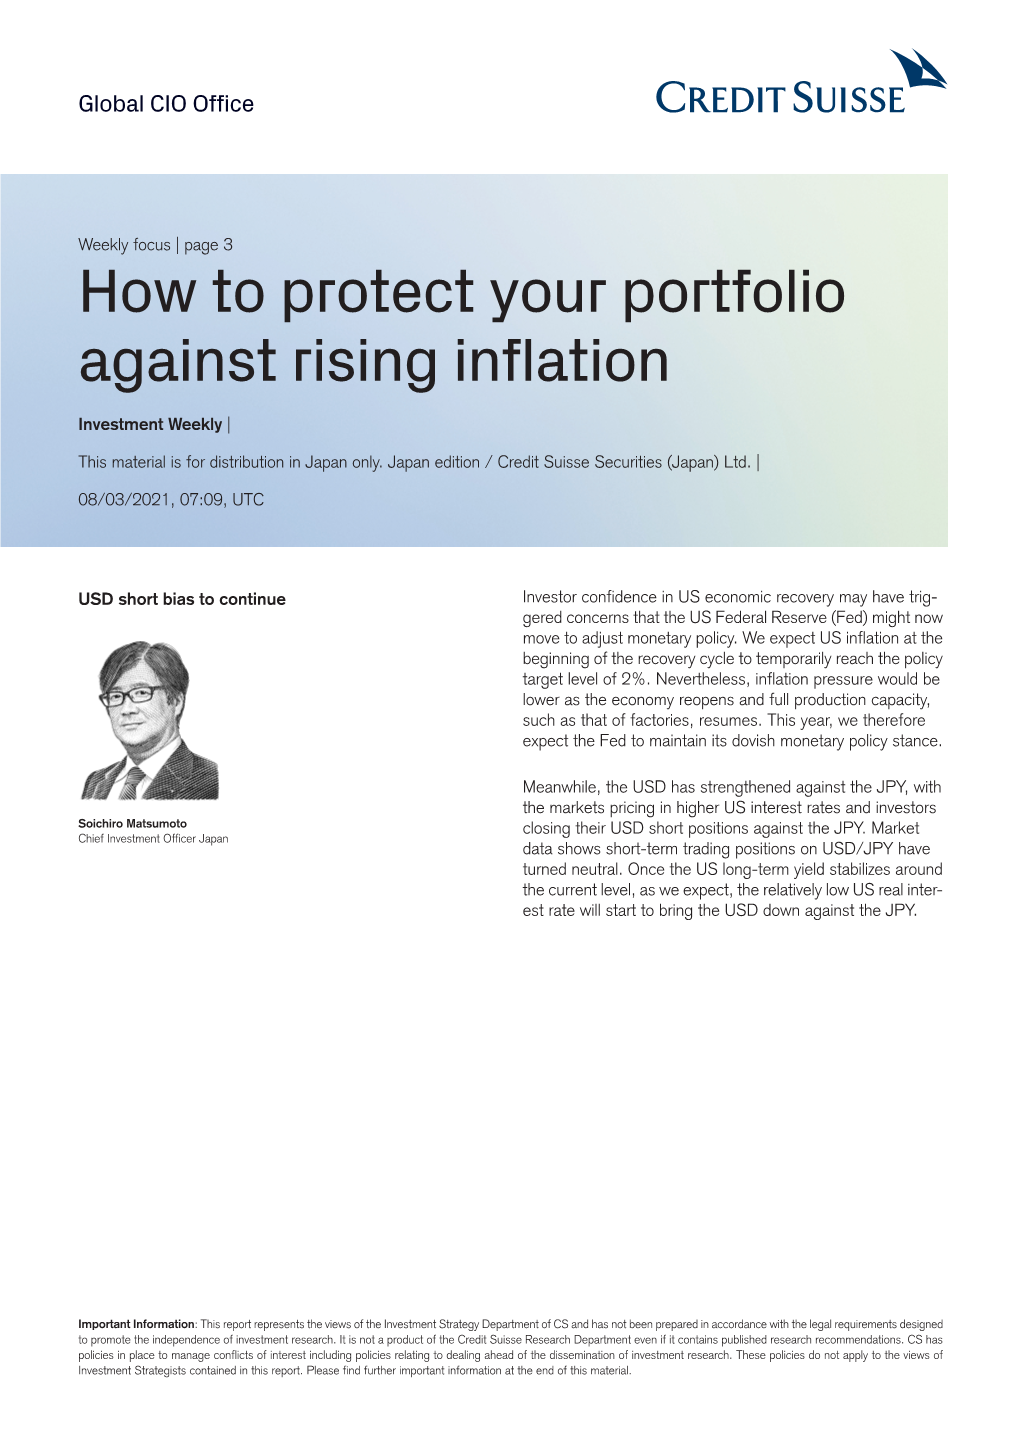 How to Protect Your Portfolio Against Rising Inflation